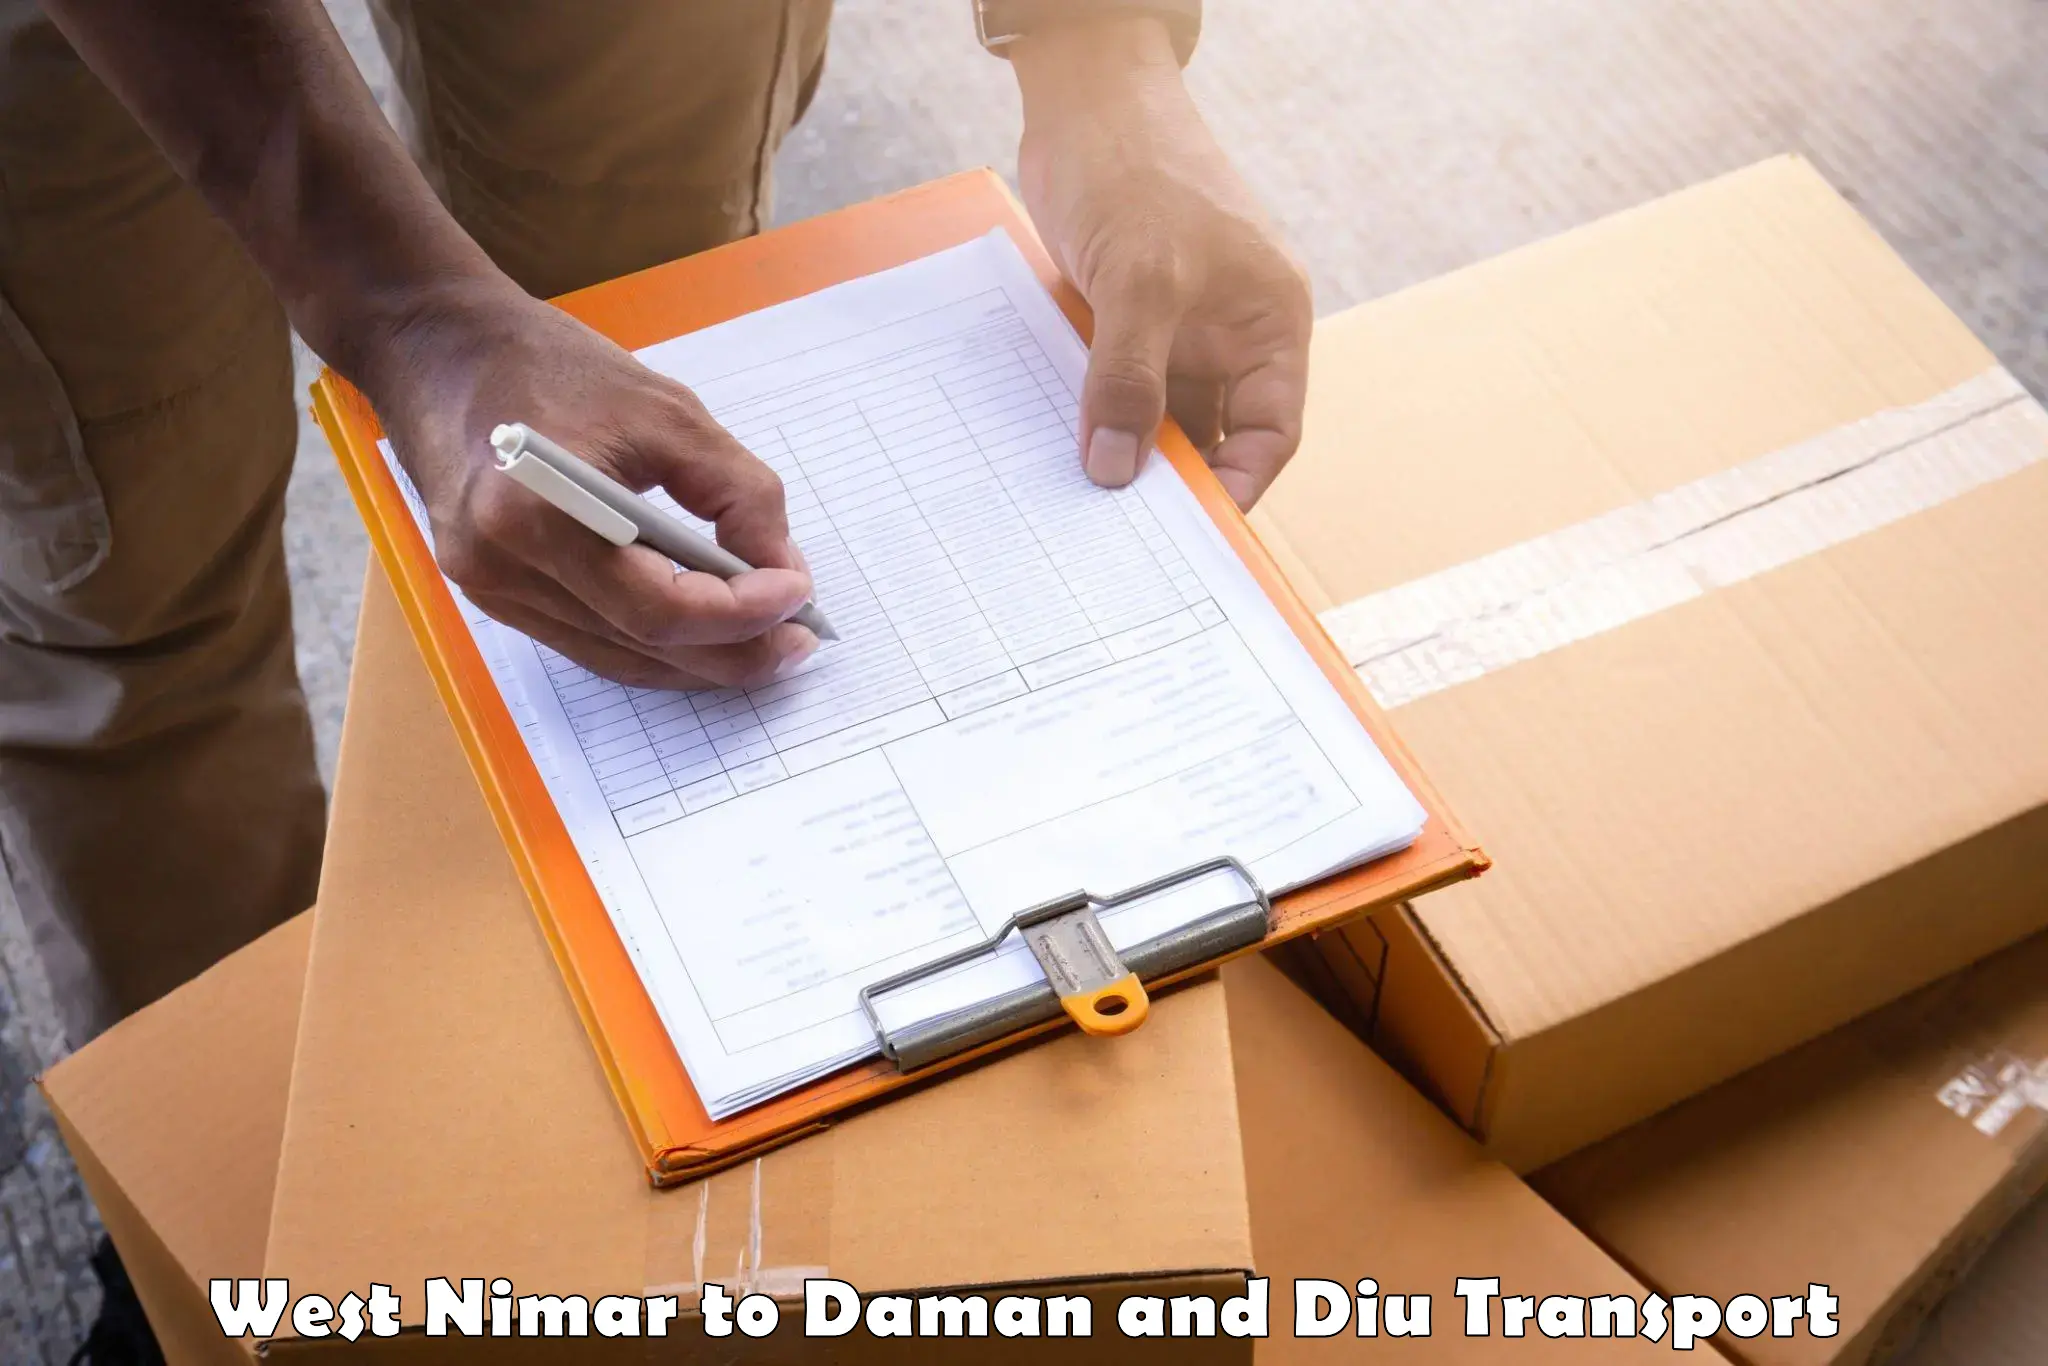 Delivery service West Nimar to Daman and Diu